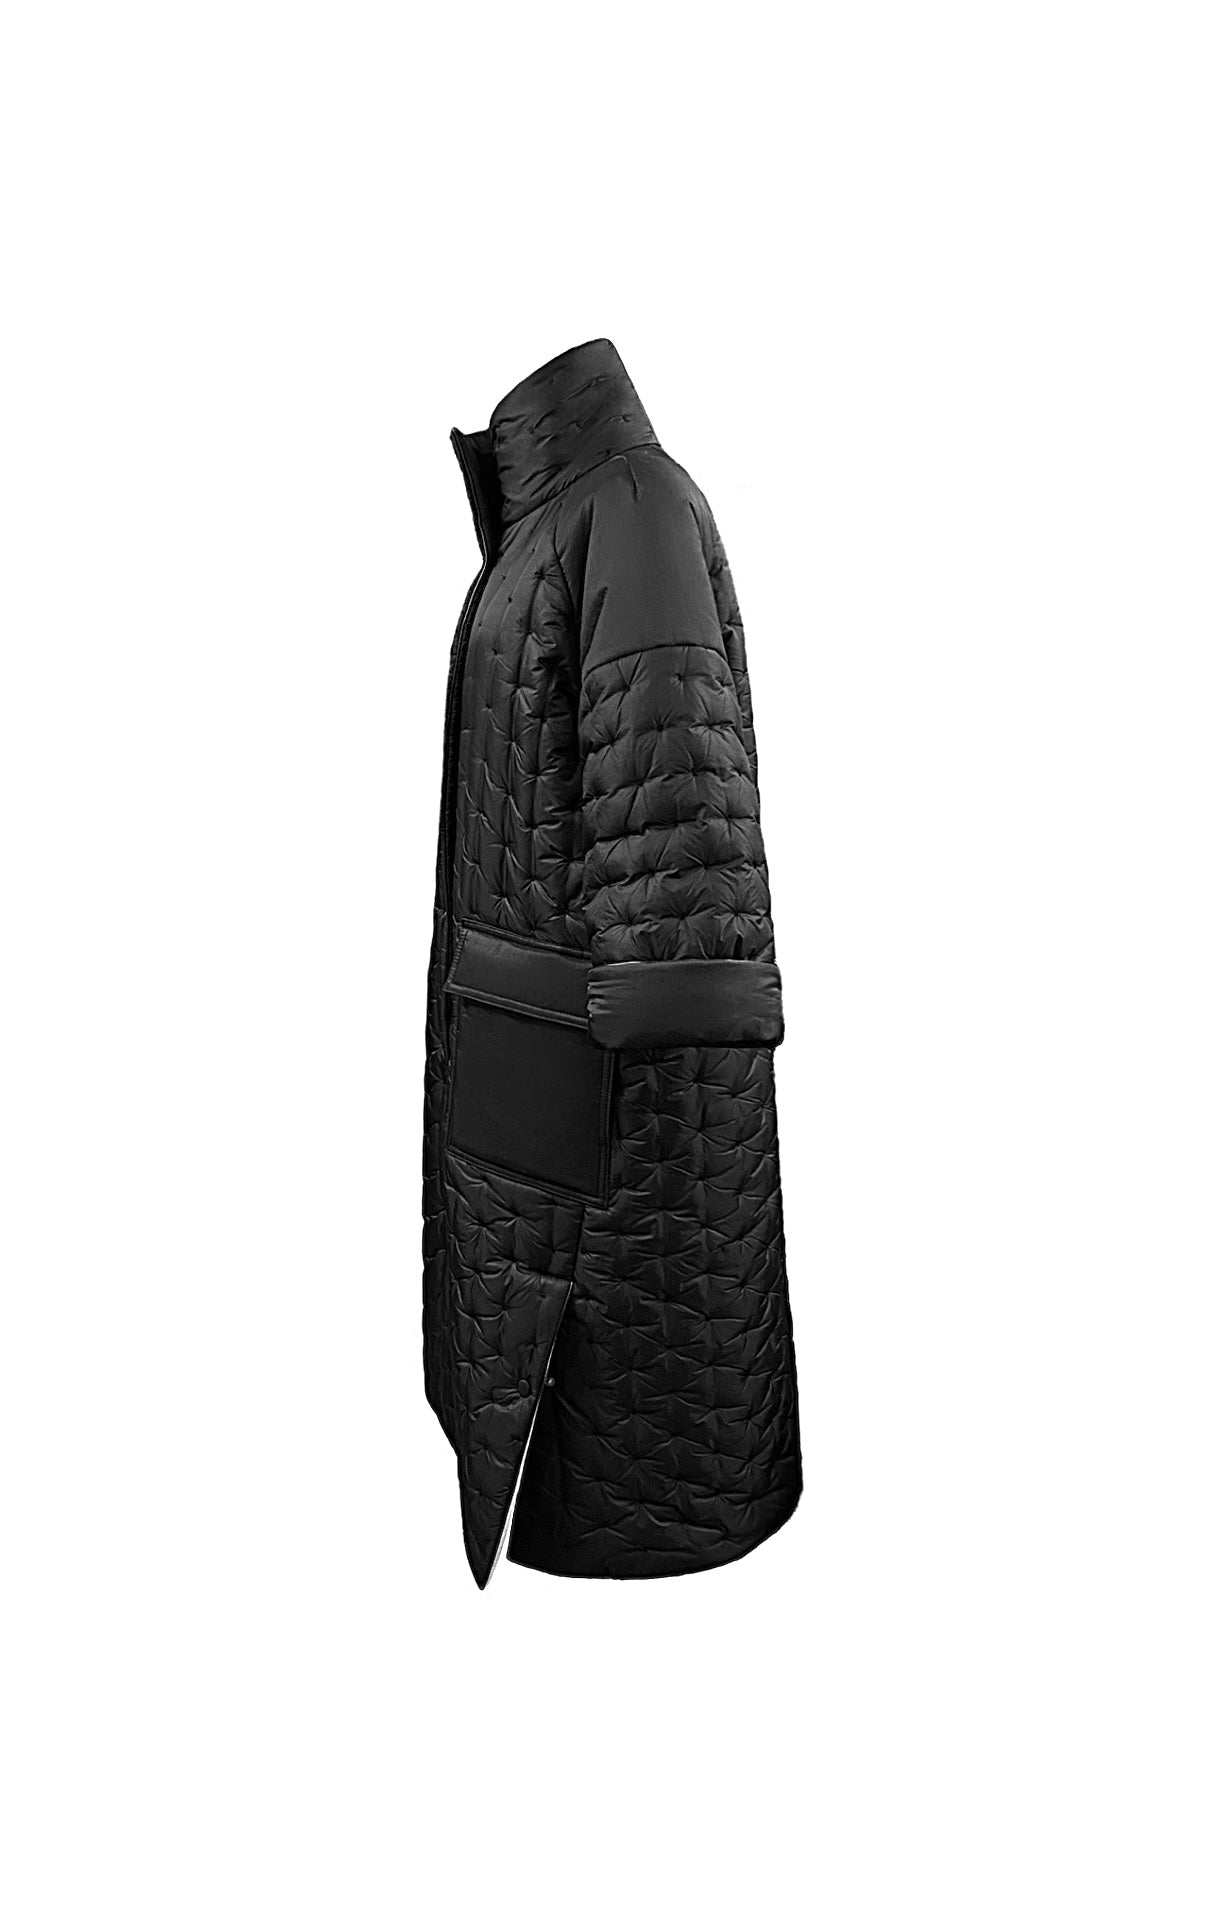 QUILTED COAT WITH TURTLE-NECK